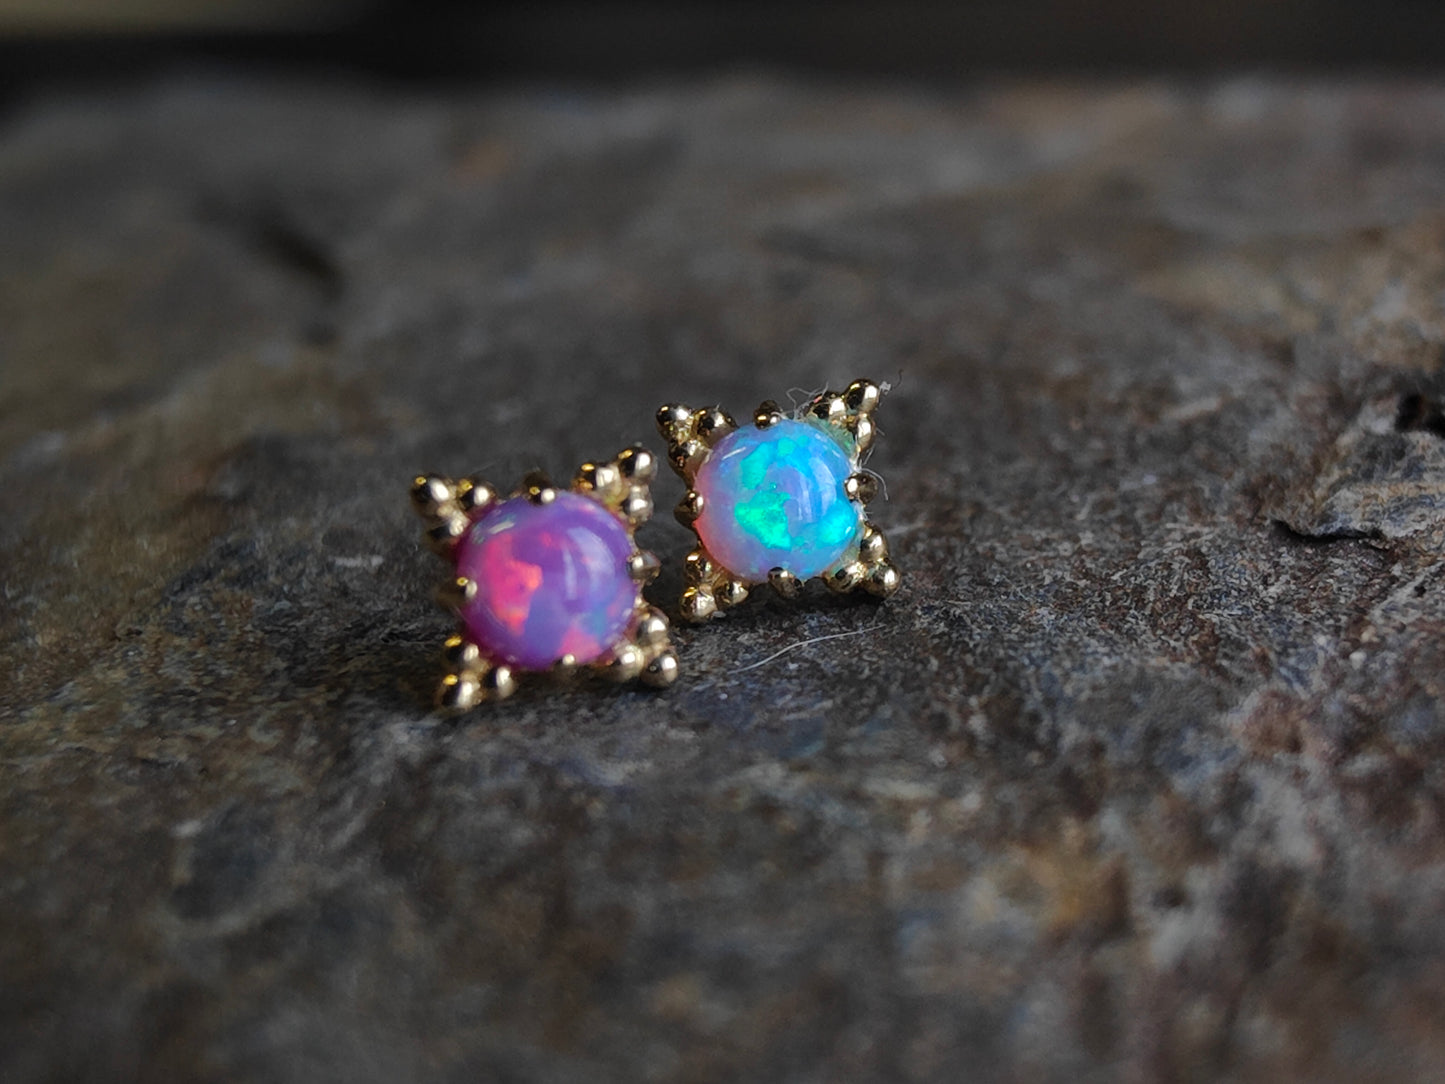 2 solid gold beaded ends, one with a purple opal and one with a blue opal